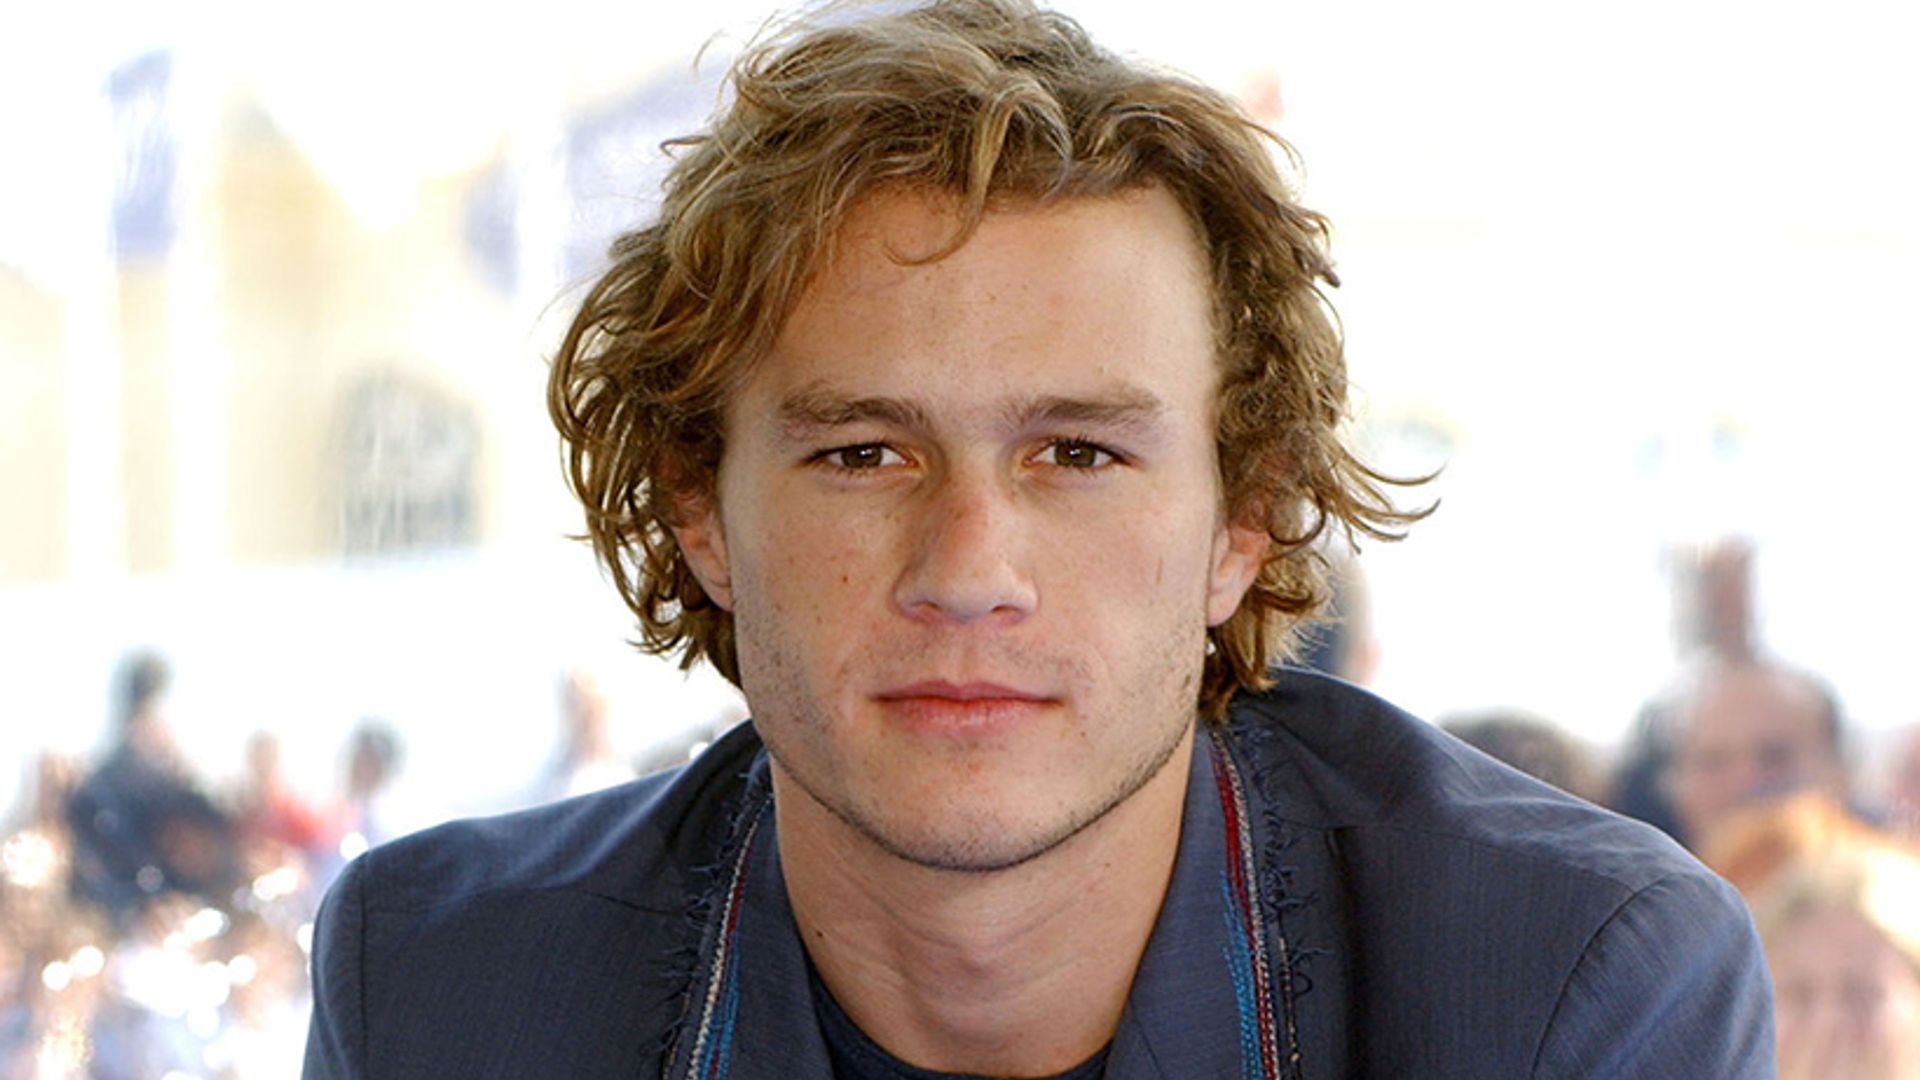 Heath Ledger's loved ones open up about his final days